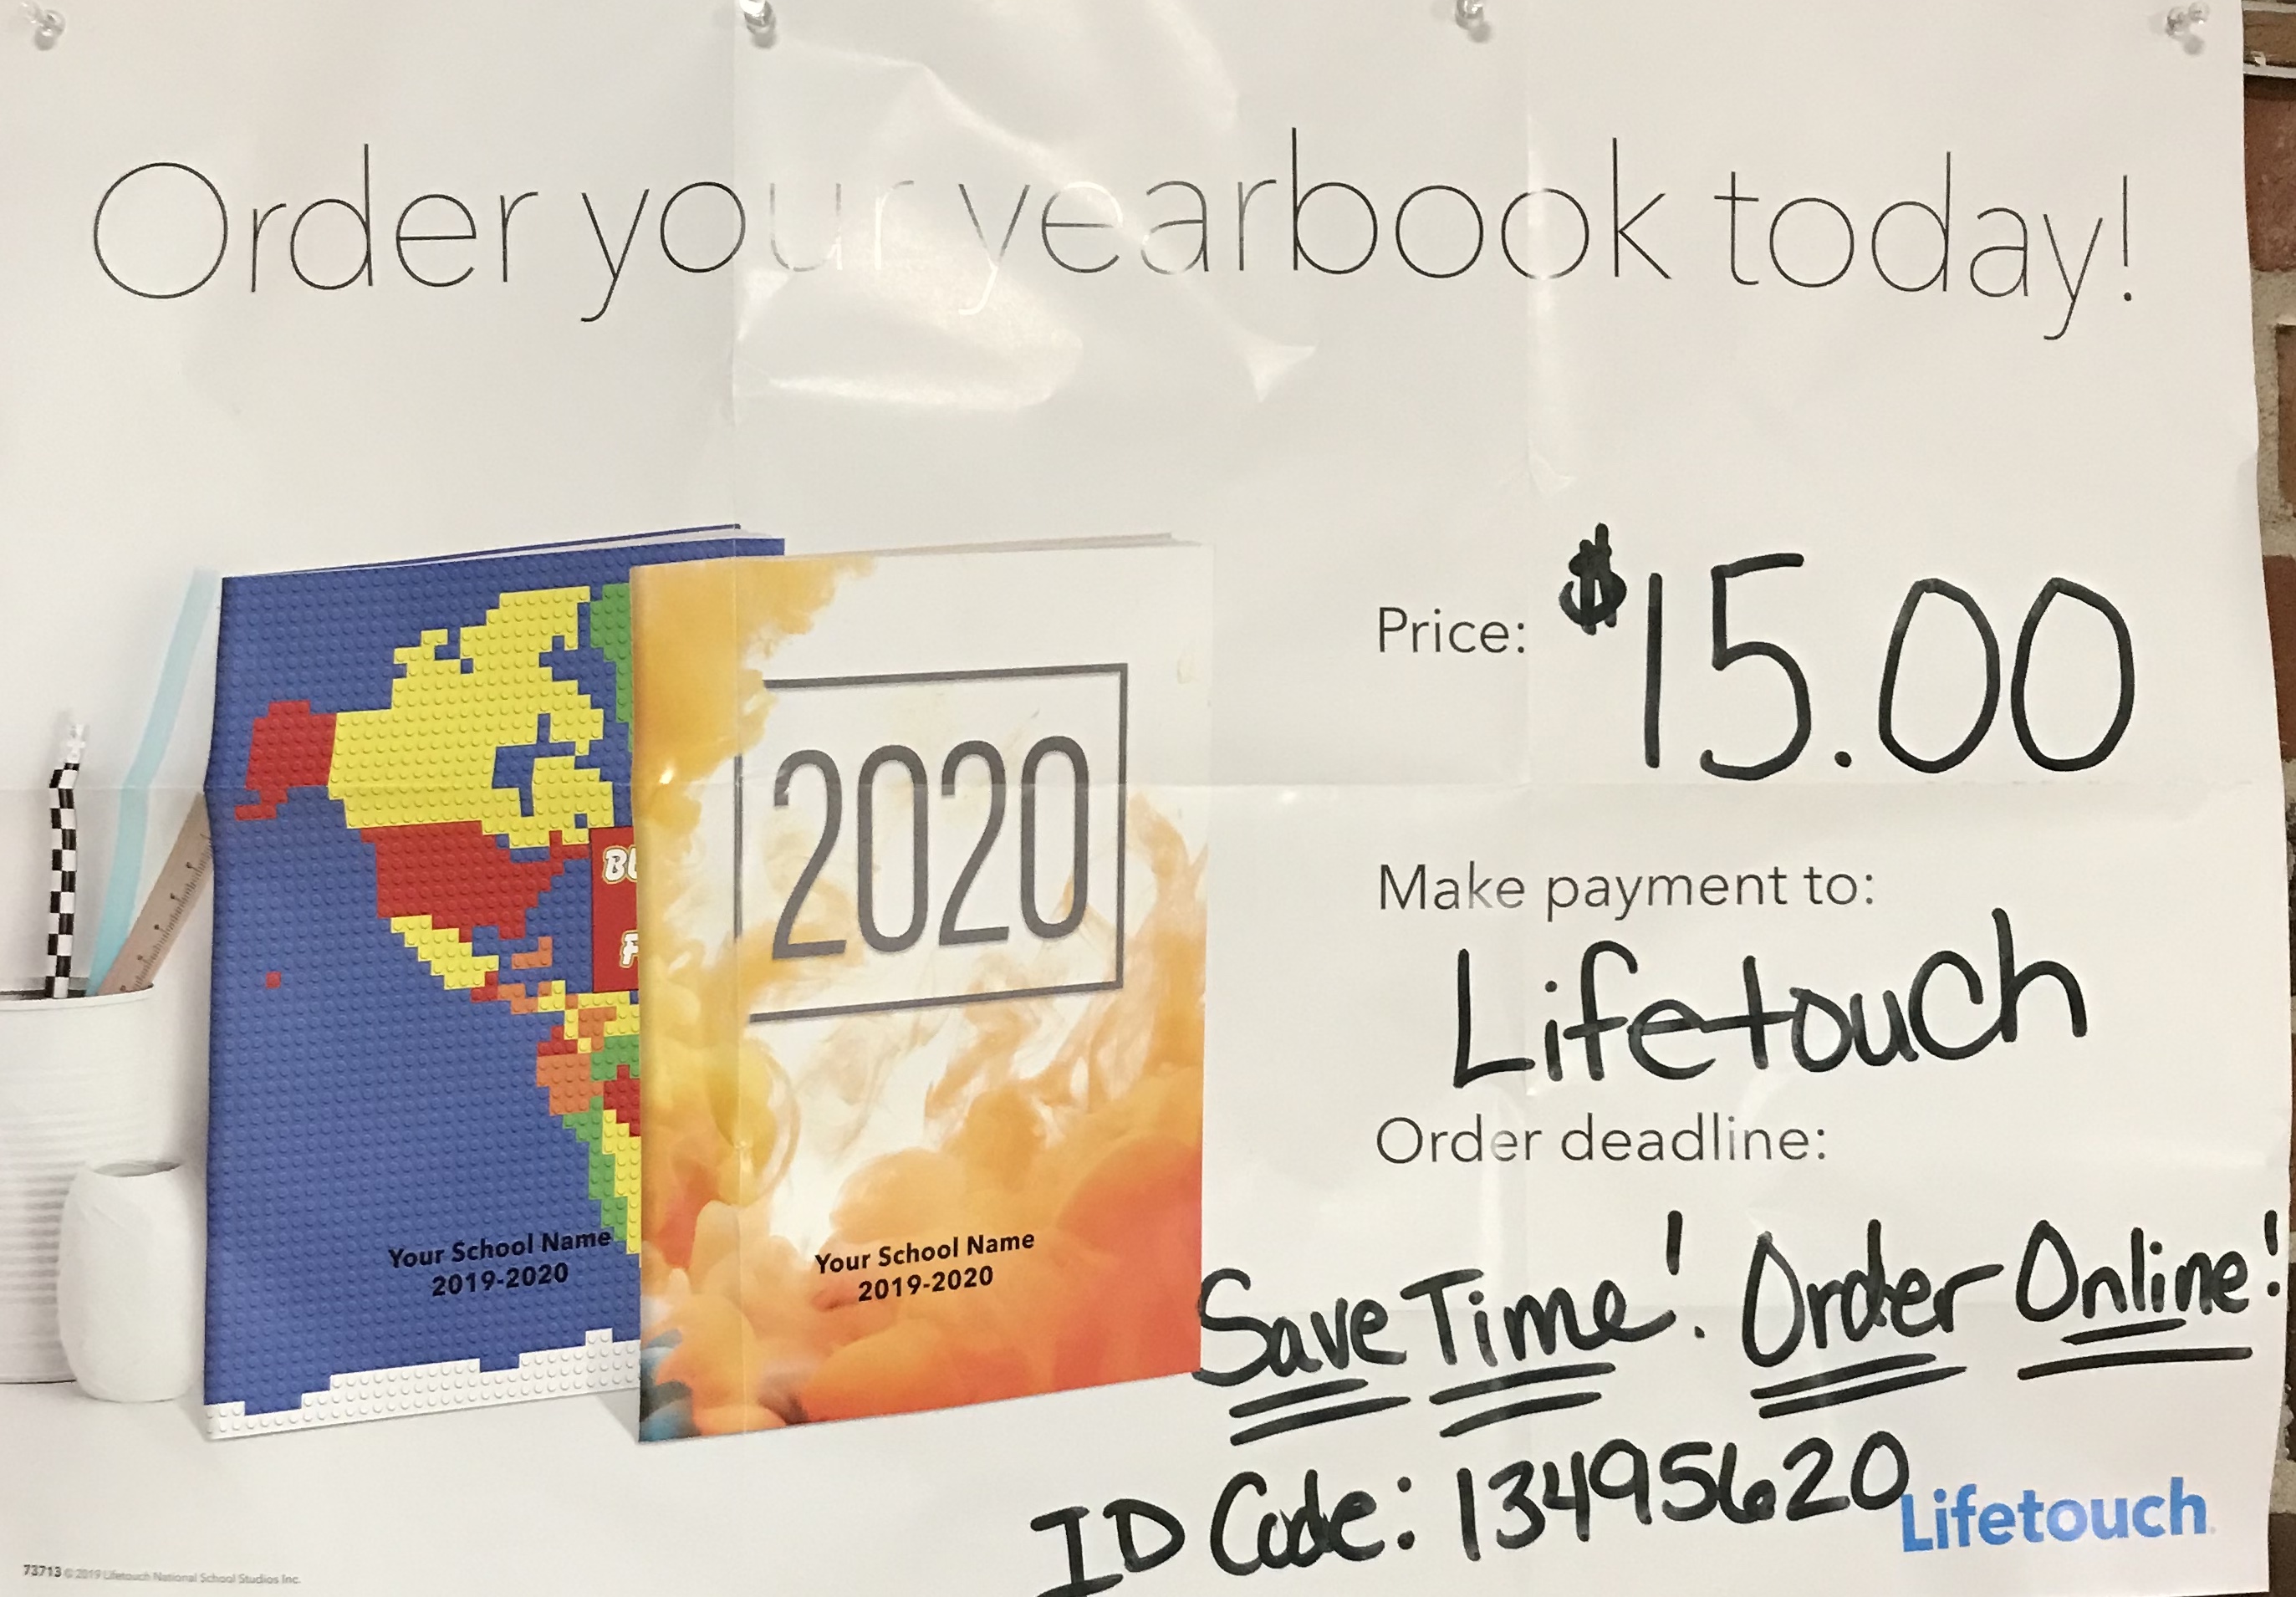 Order your yearbook today! $15.00